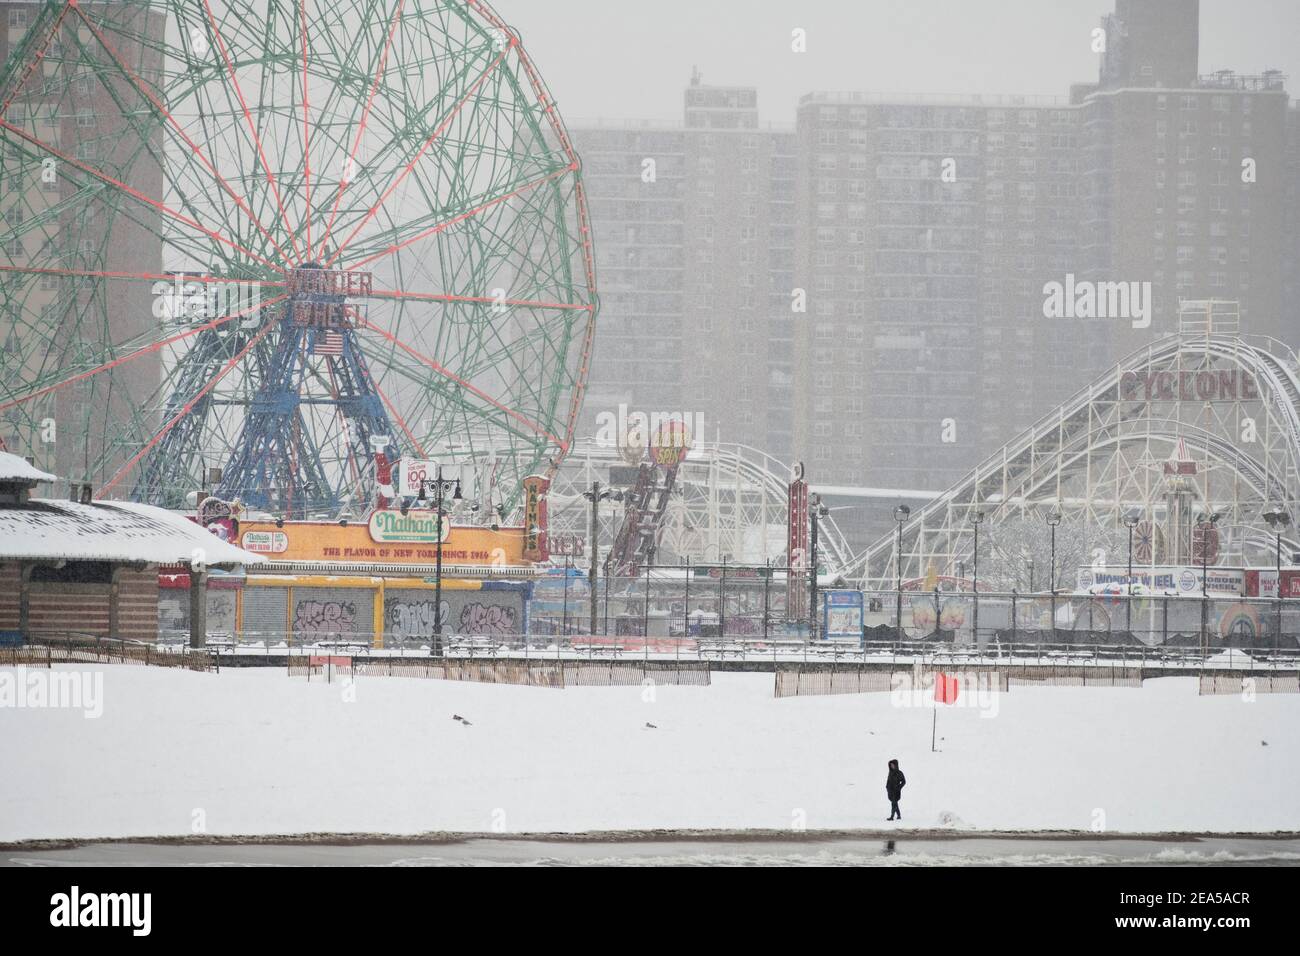 Brooklyn, New York, USA. 07 February 2021, Brooklyn, New York, USA. Snow piles up on Coney Island's famous attractions as New York City experiences its second major winter storm in seven days Credit: Joseph Reid/Alamy Live News Stock Photo